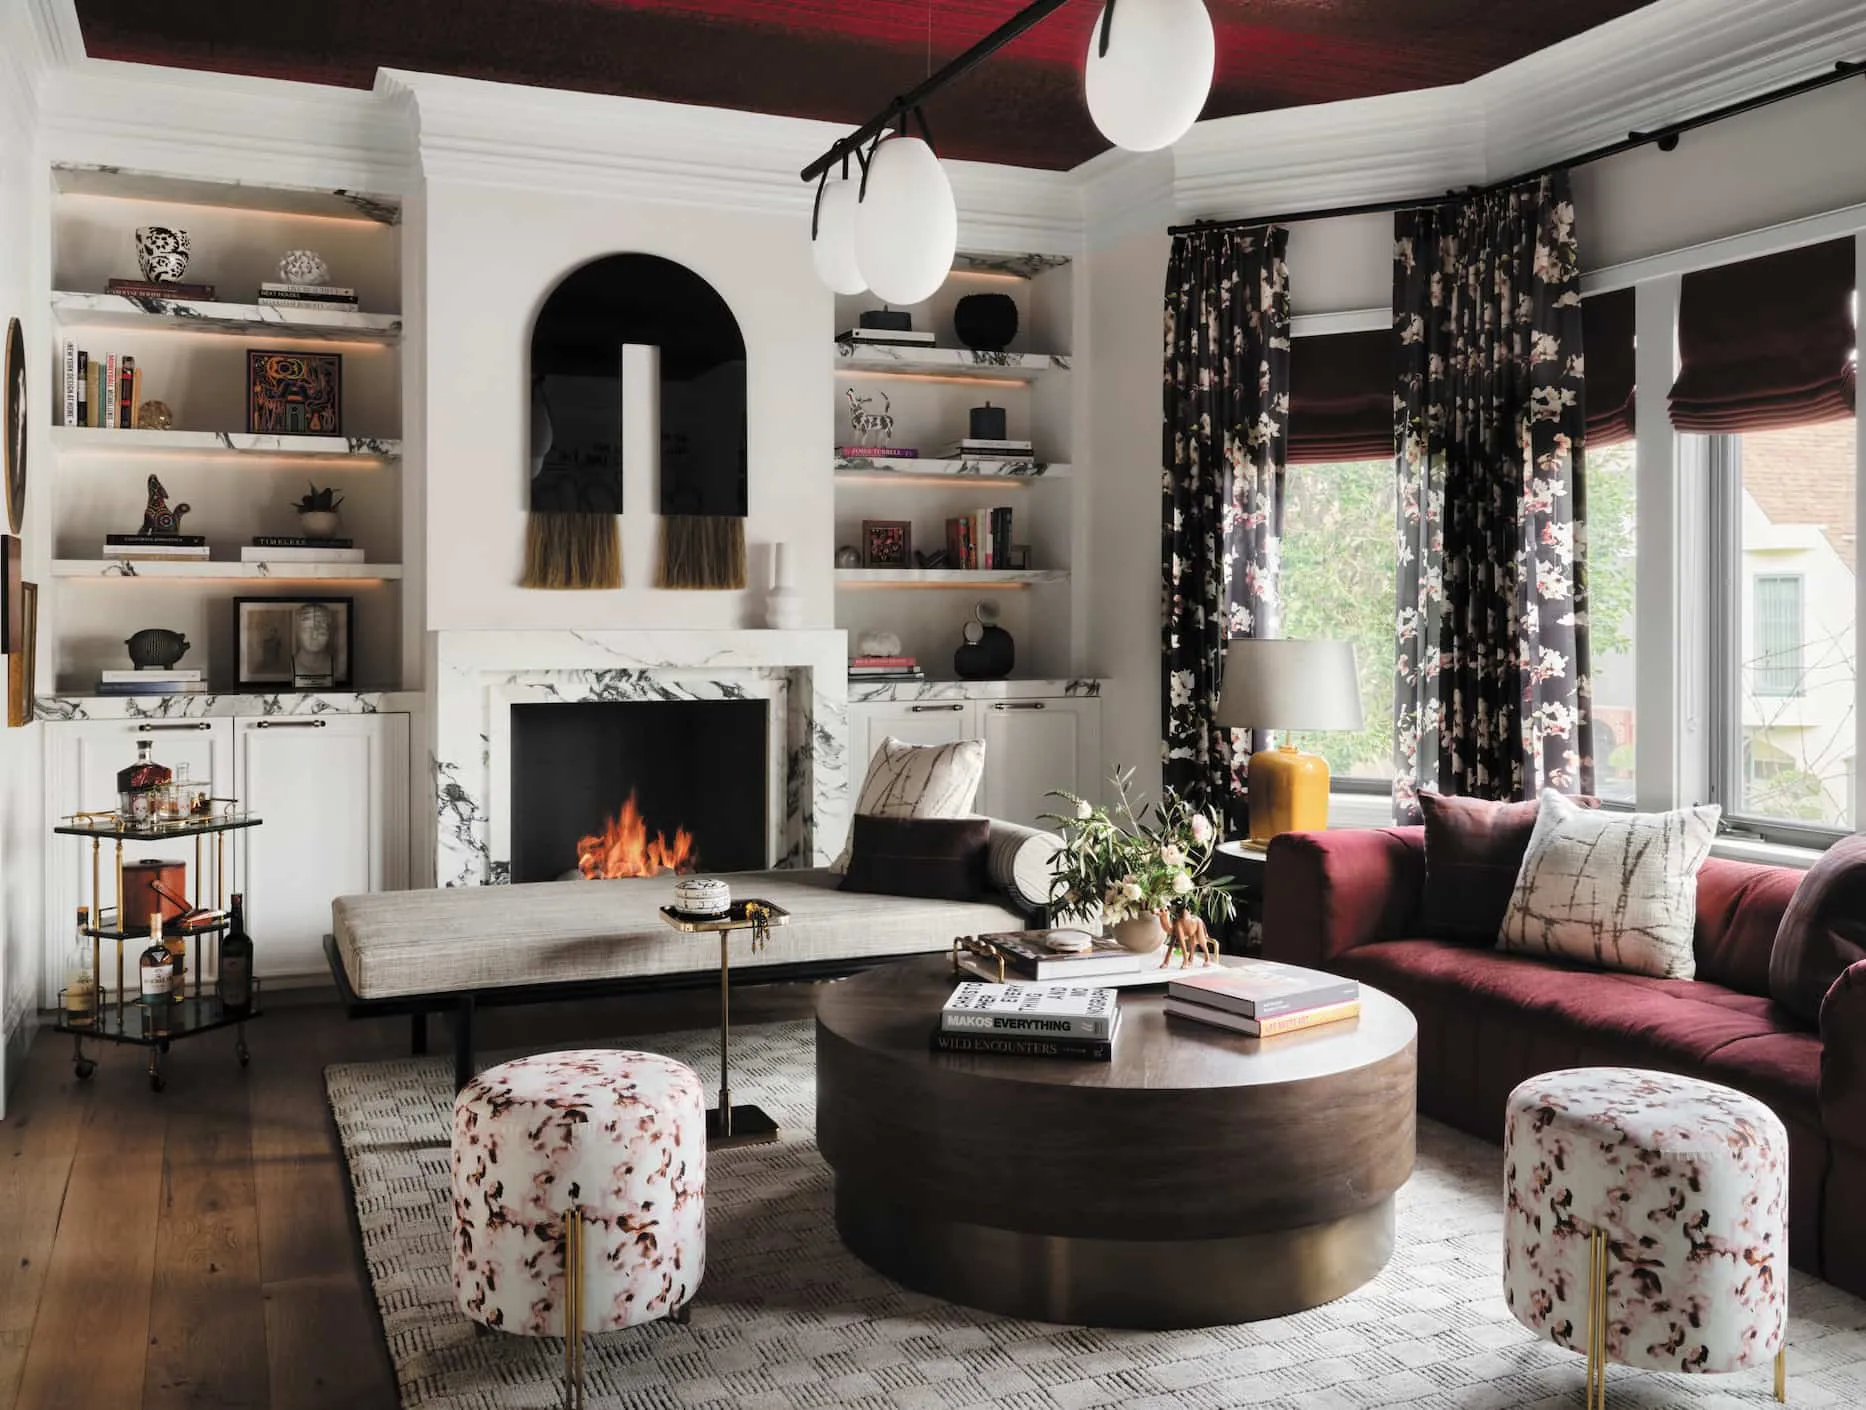 hall decor using collectibles, coffee table, furniture, ceiling lights, fireplace, curtains